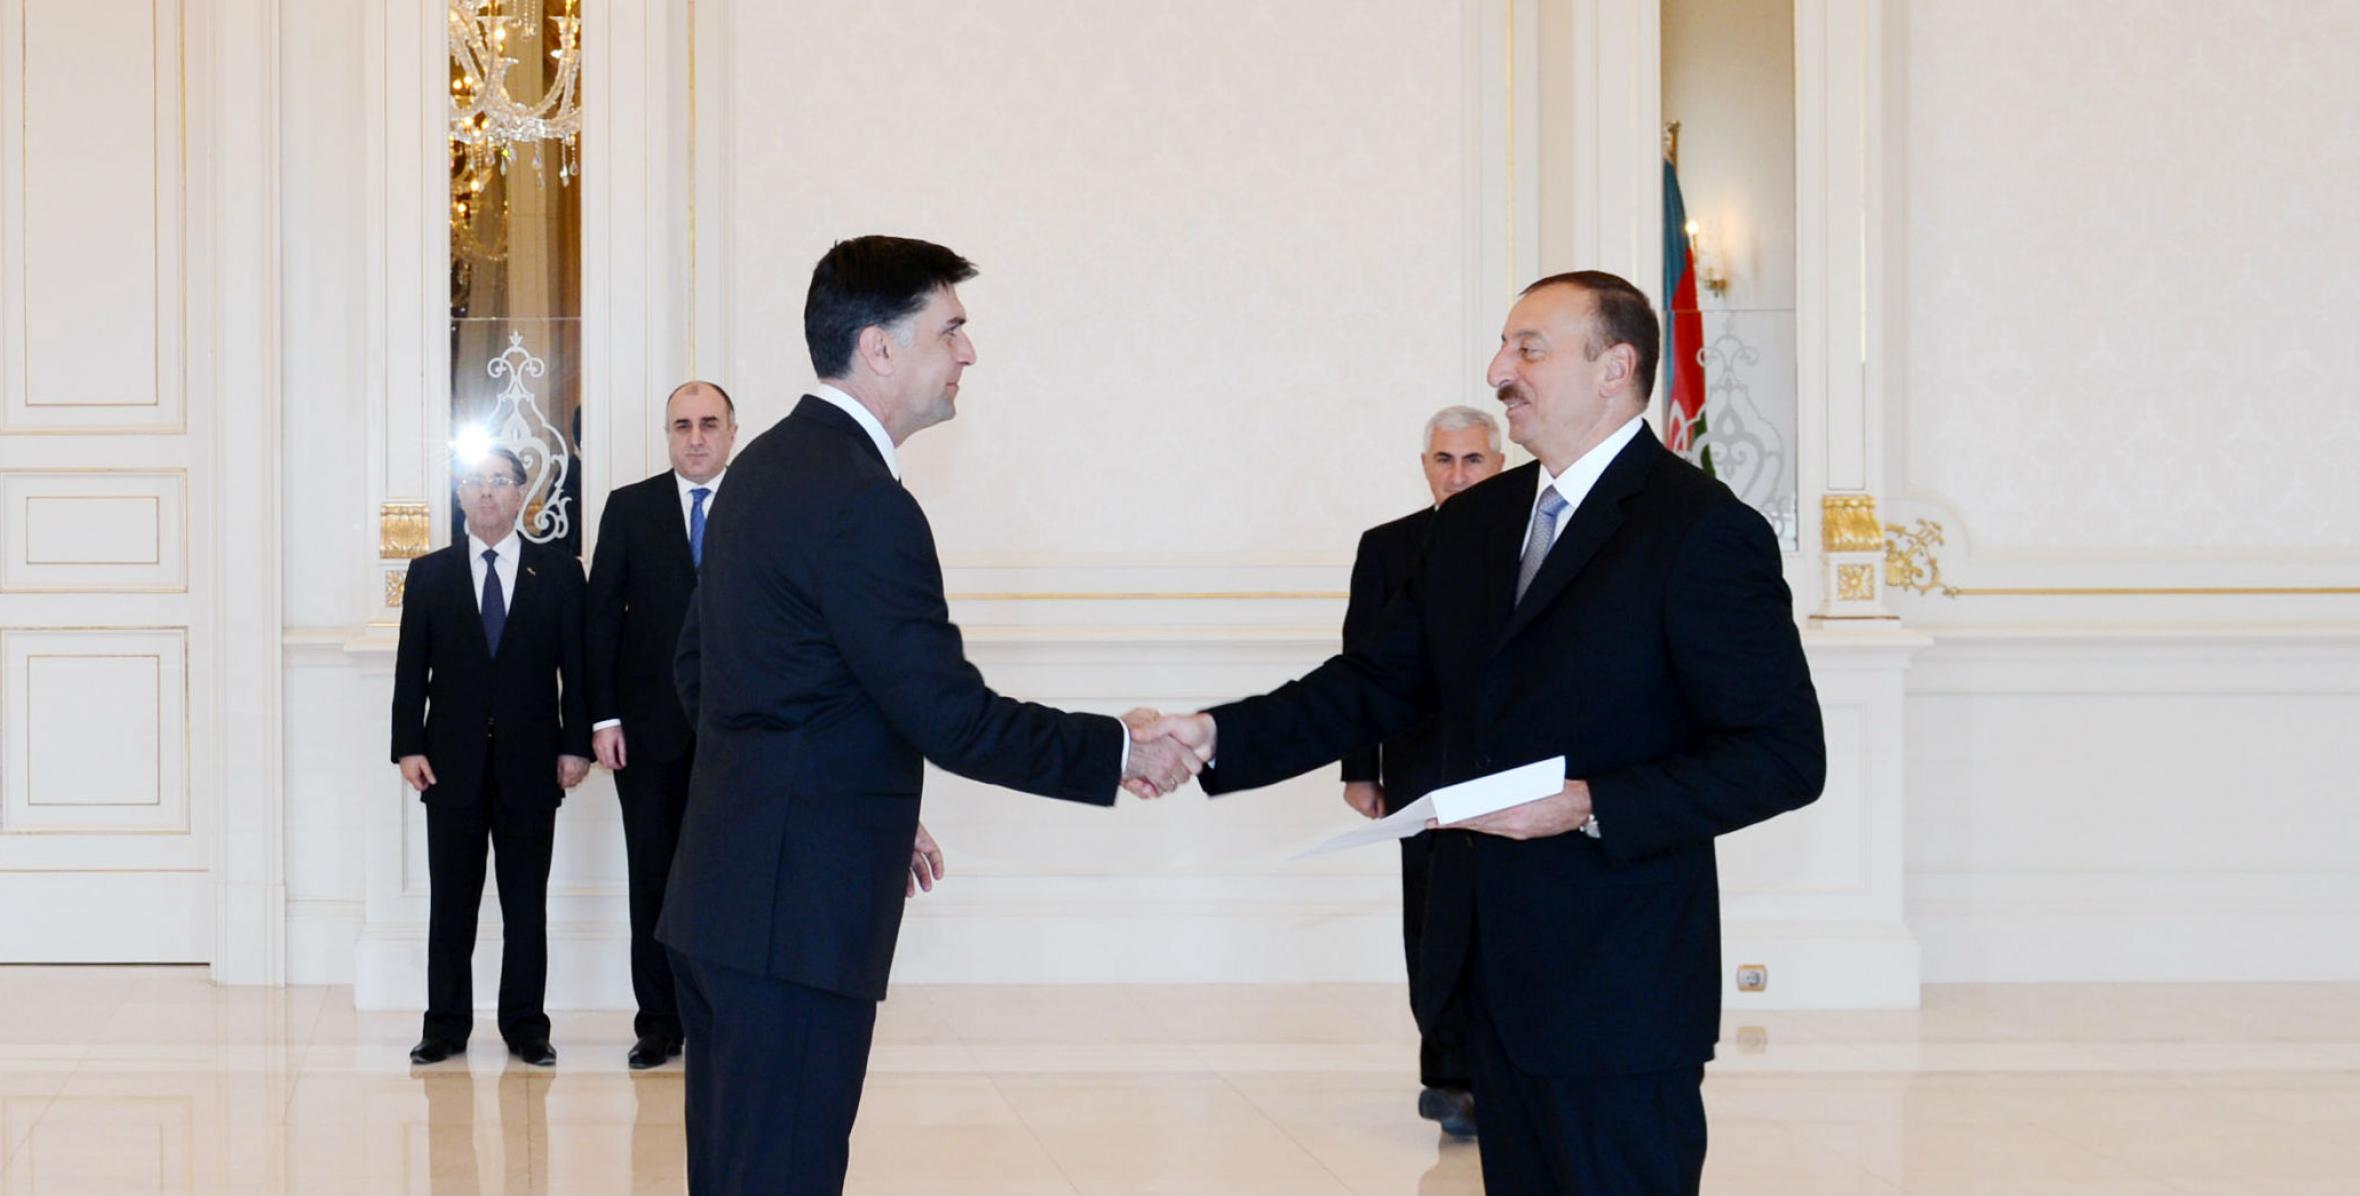 Ilham Aliyev accepted the credentials from the newly-appointed Ambassador of Bosnia and Herzegovina to Azerbaijan